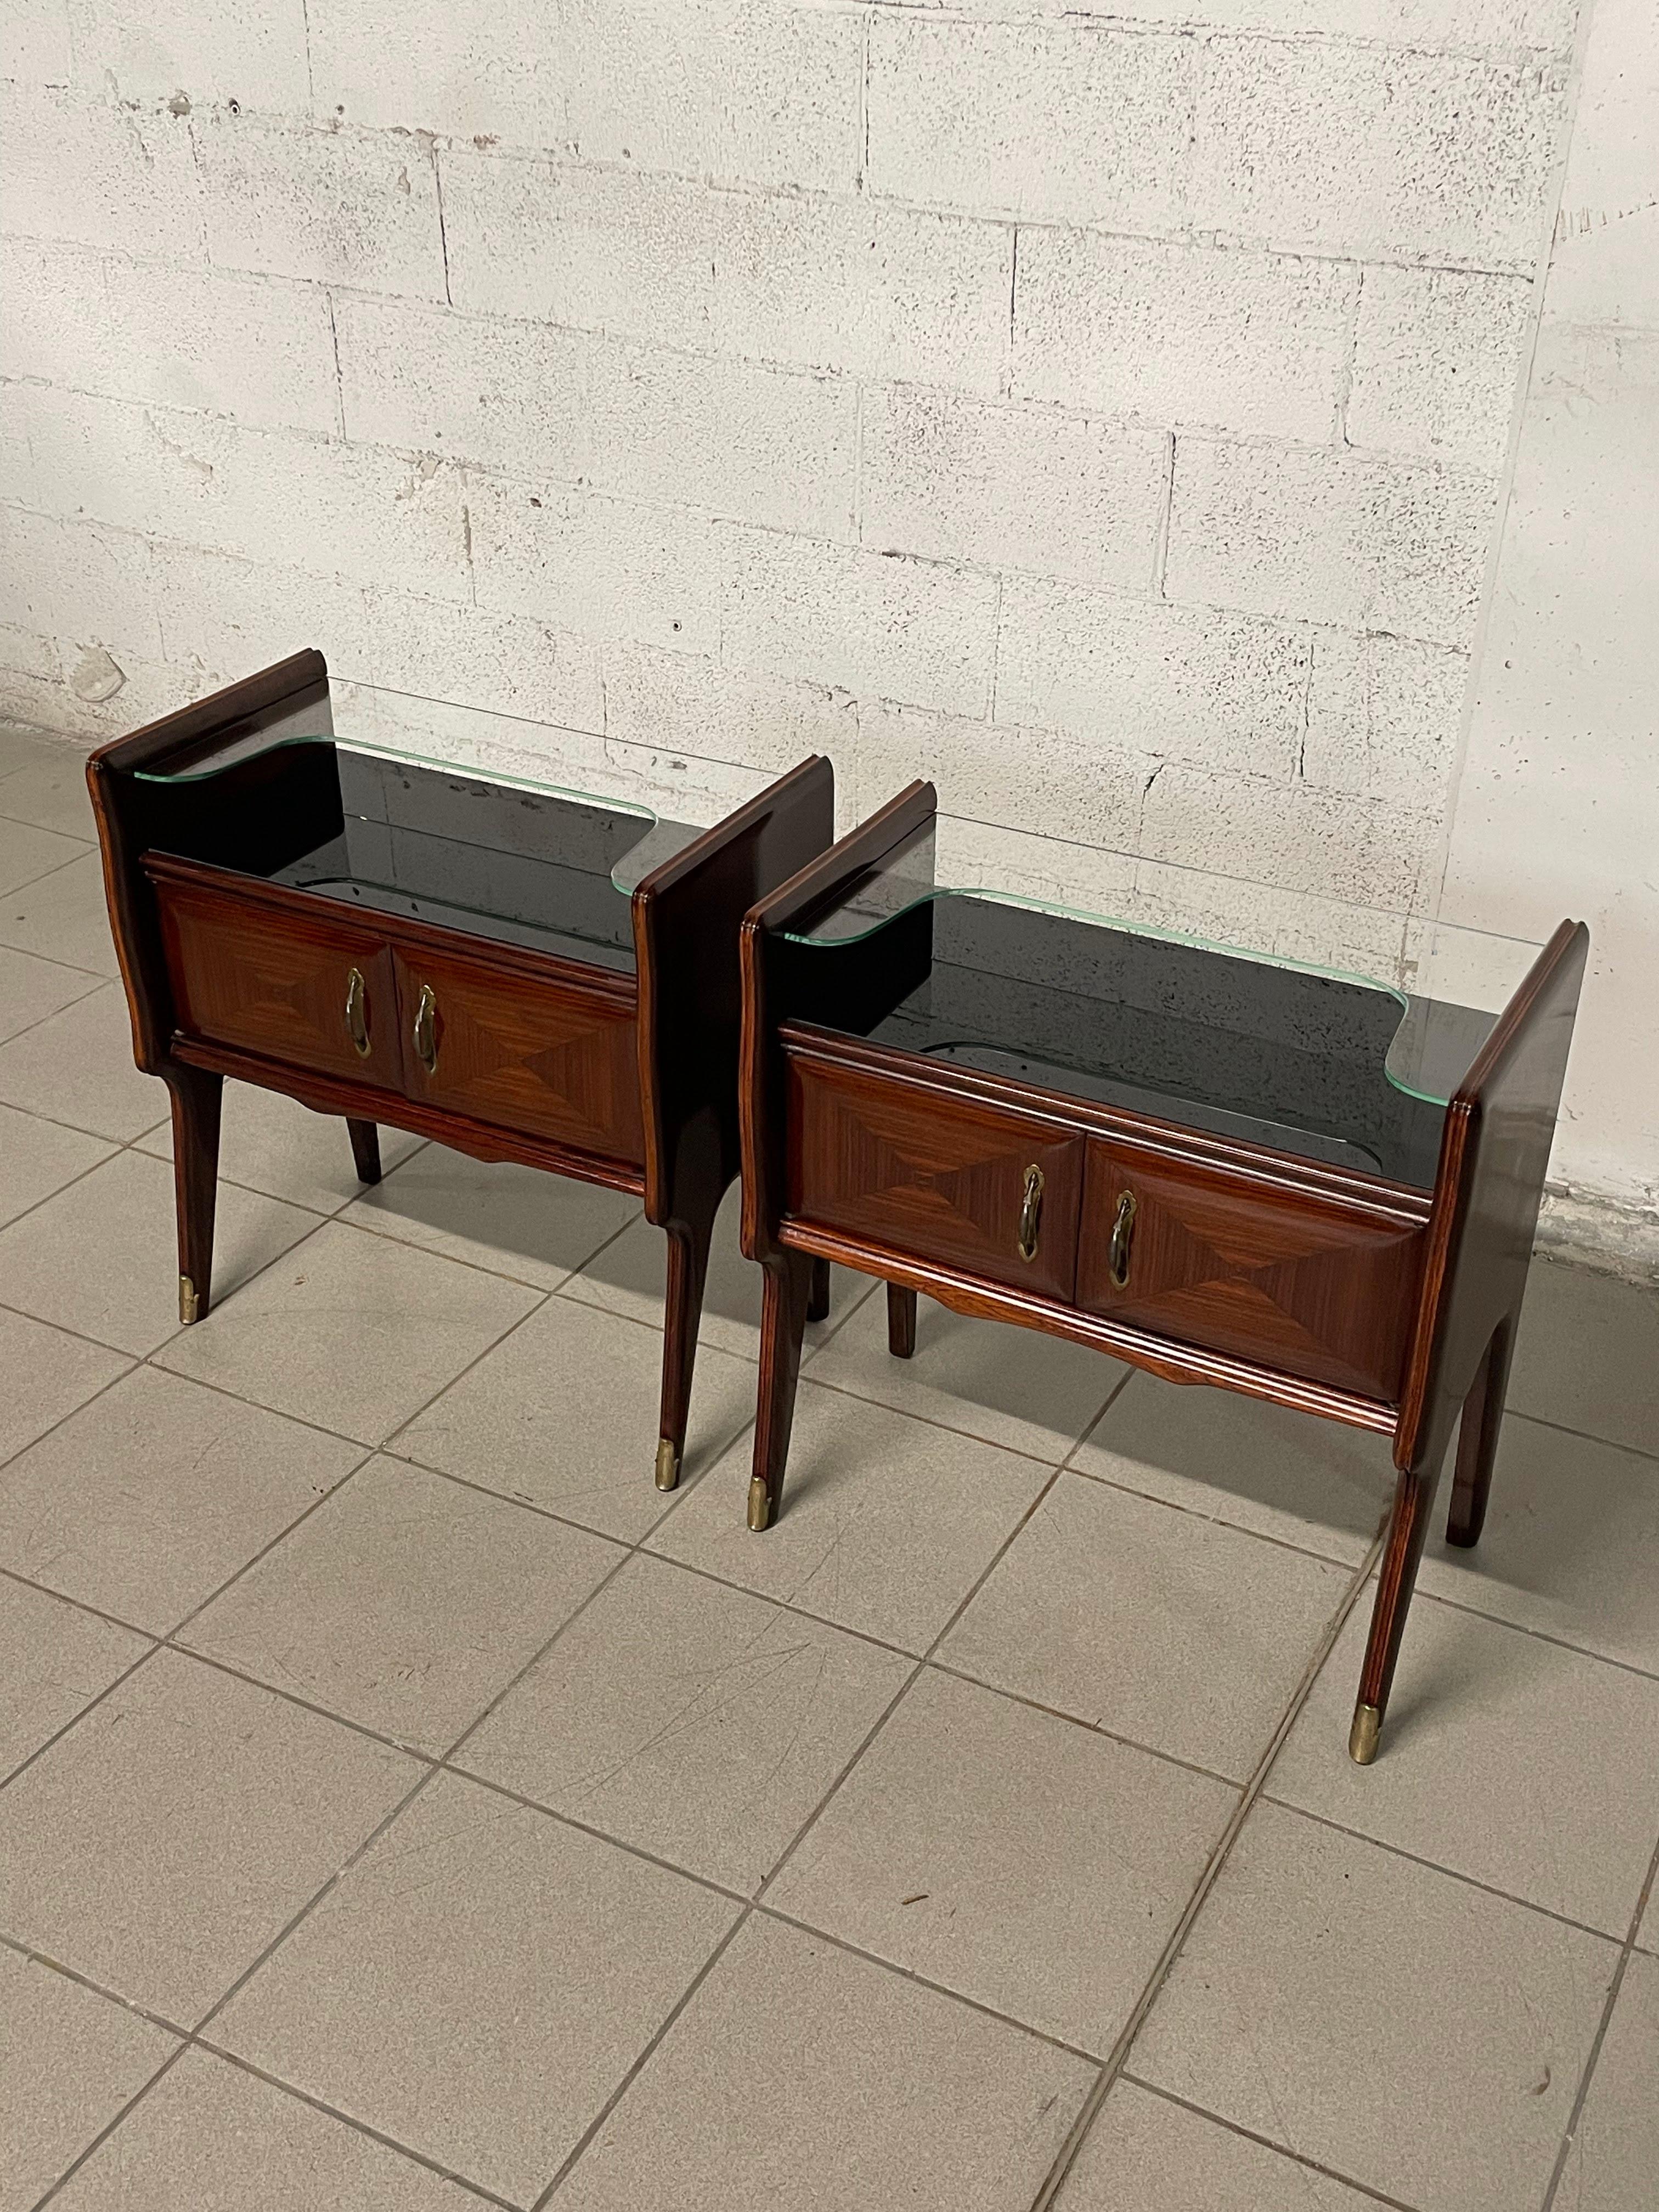 Italian Pair of mahogany and glass bedside tables from the 1950s